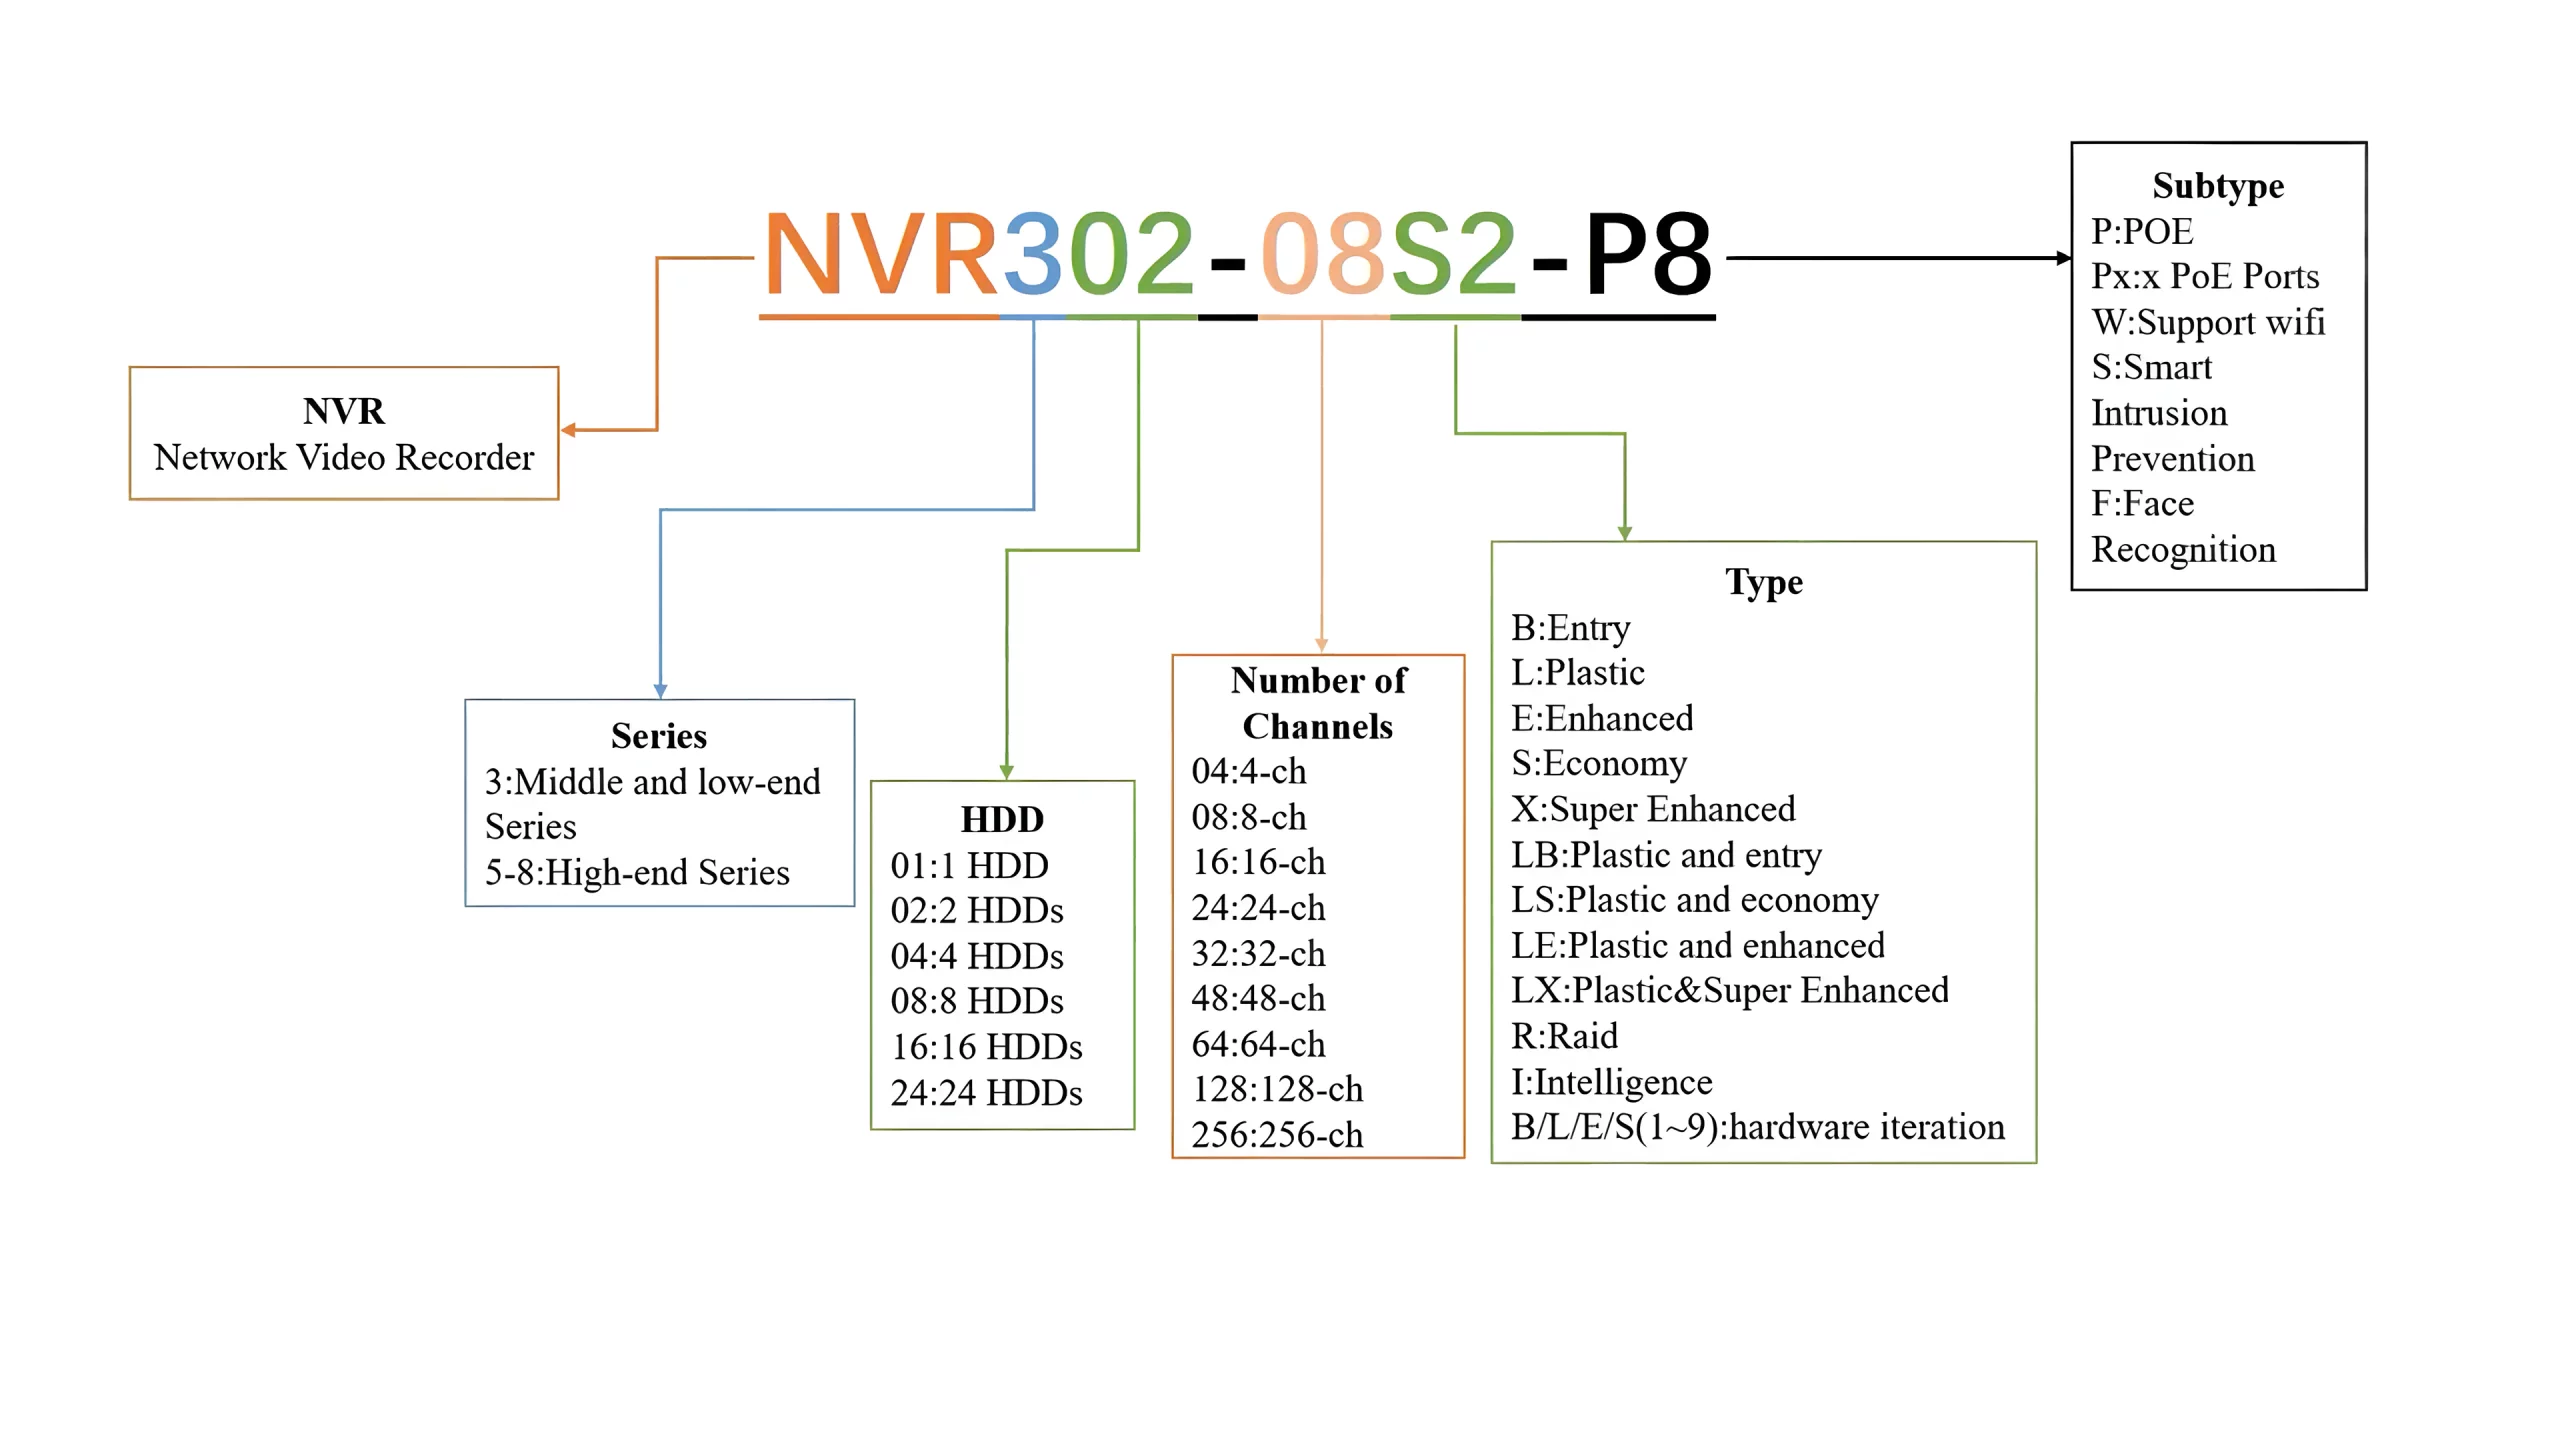 Uniview NVR Naming Diagram for Network Video Recorders